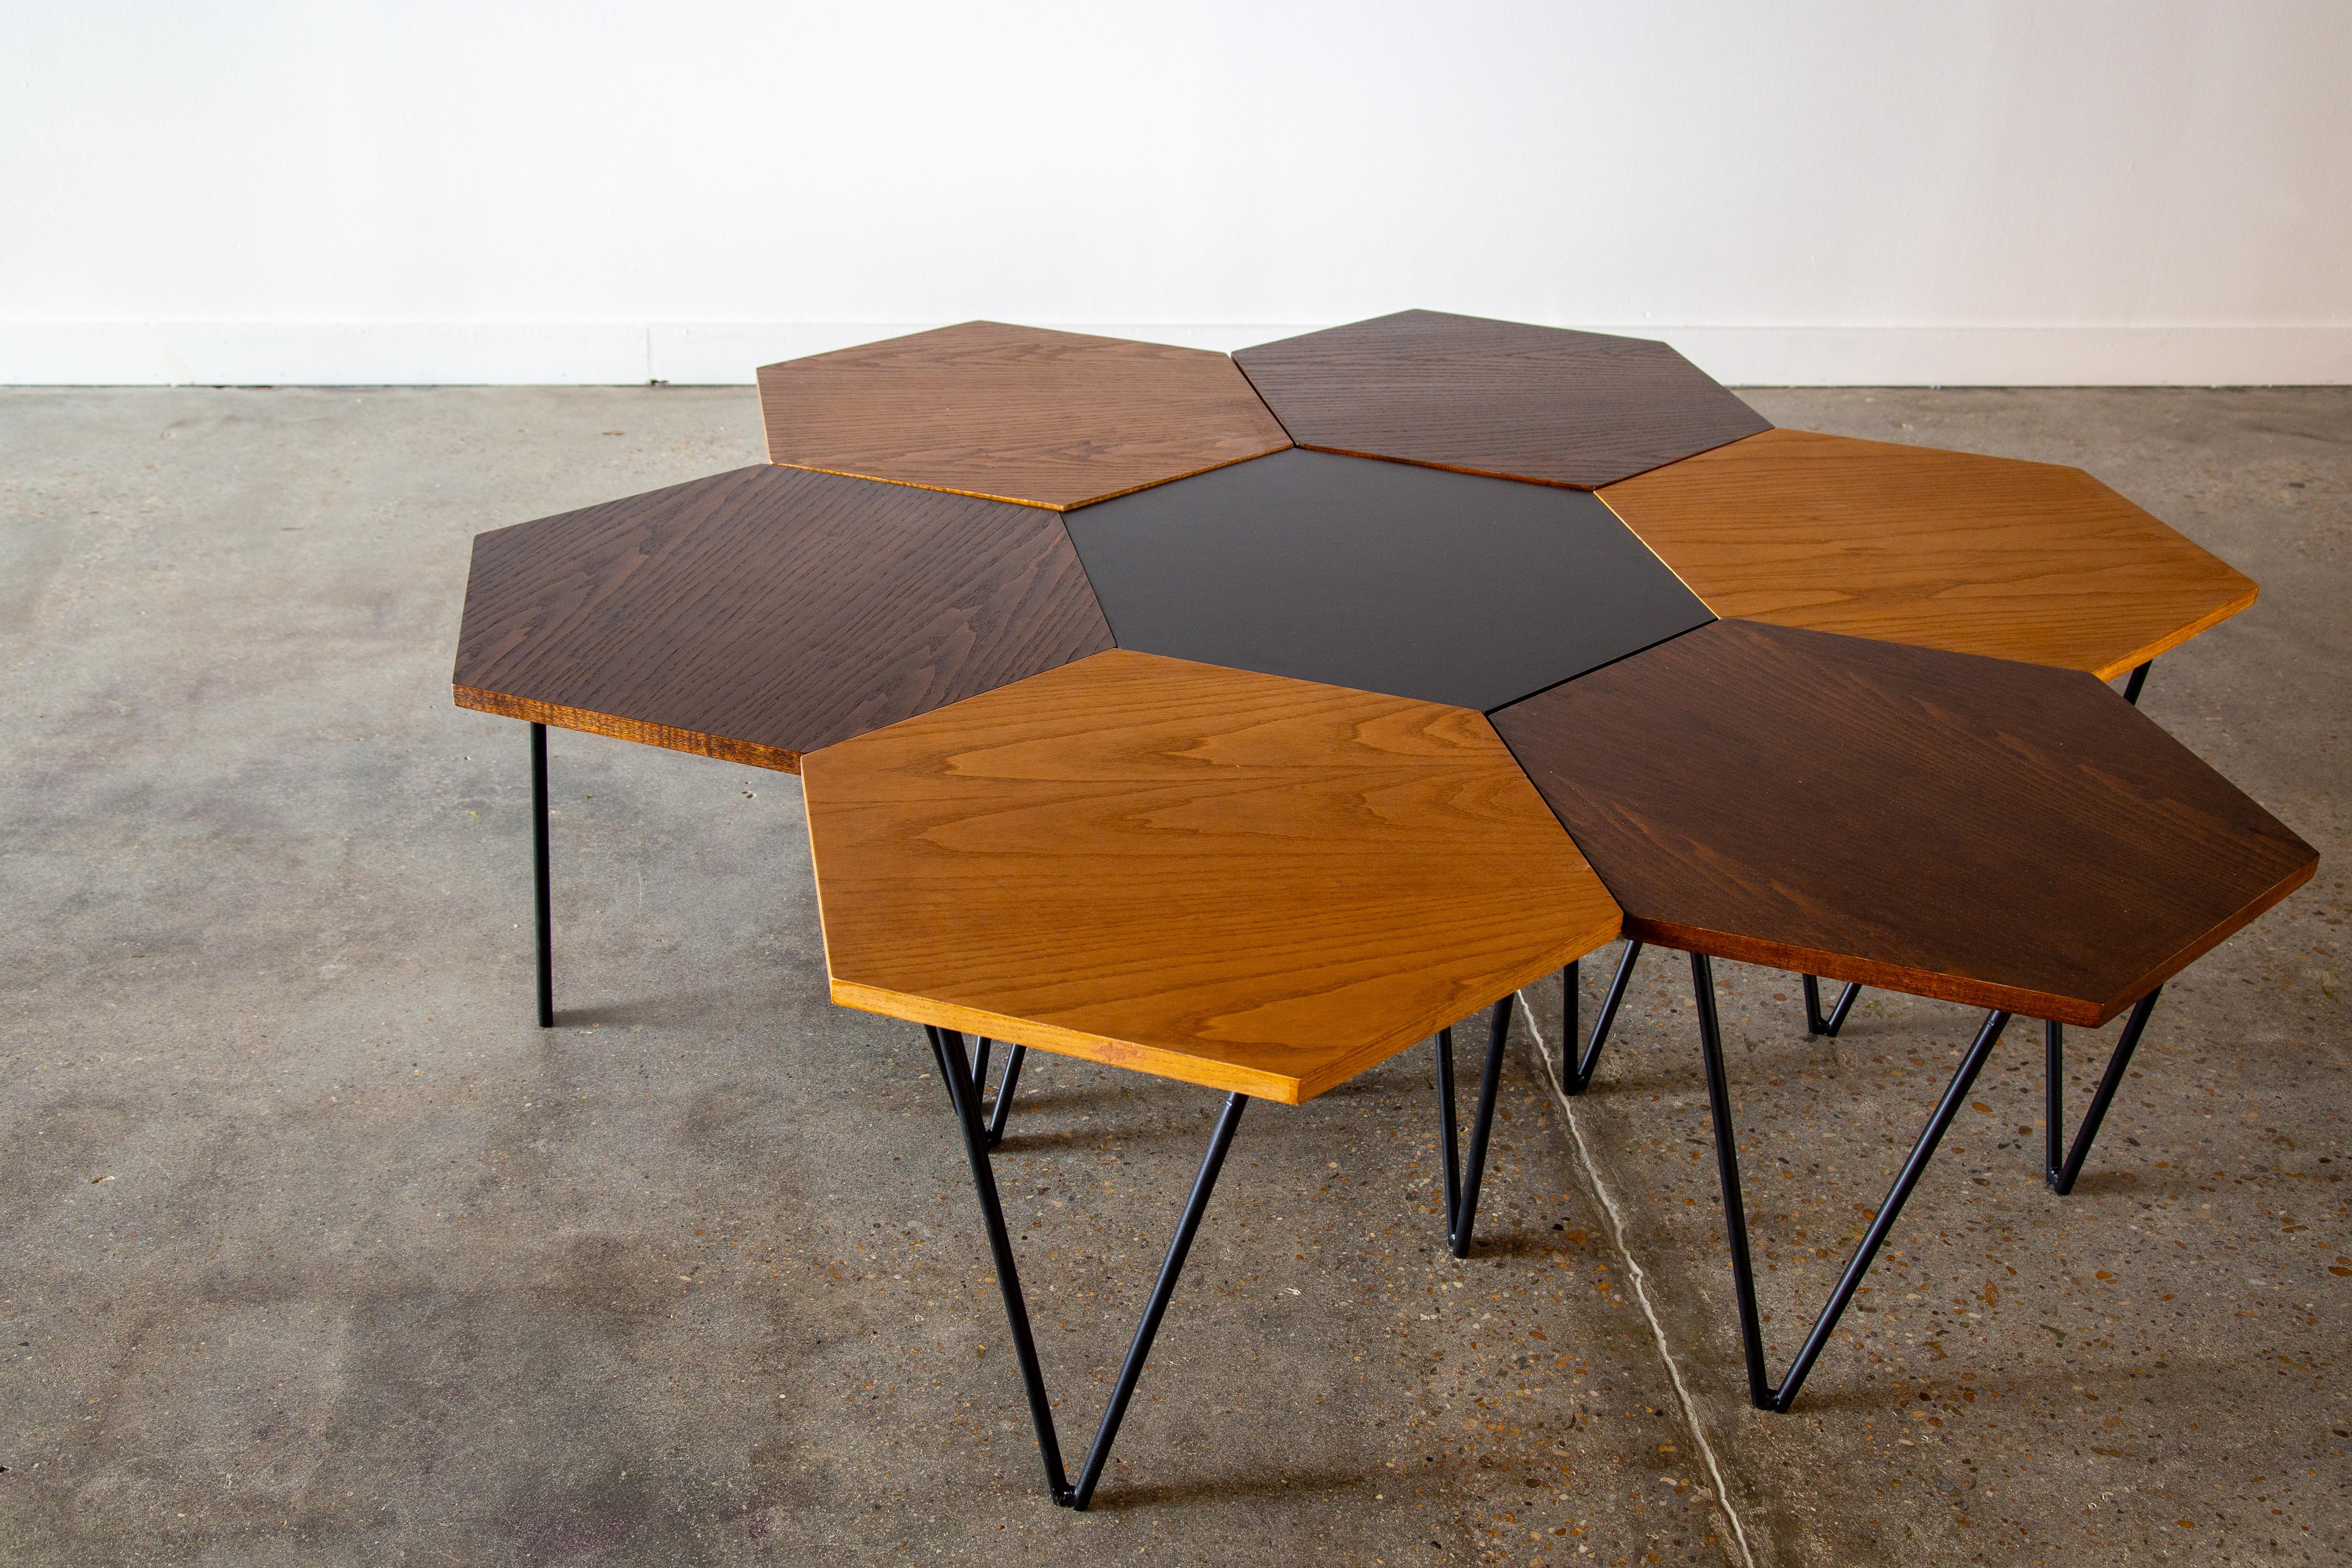 An exceedingly rare set of tables designed by Gio Ponti for ISA.  A tricolor blend of tops include black laminate, darker stained oak and a honey stained oak, perched on a tripod of hairpin enameled steel legs.  Each example retains its original